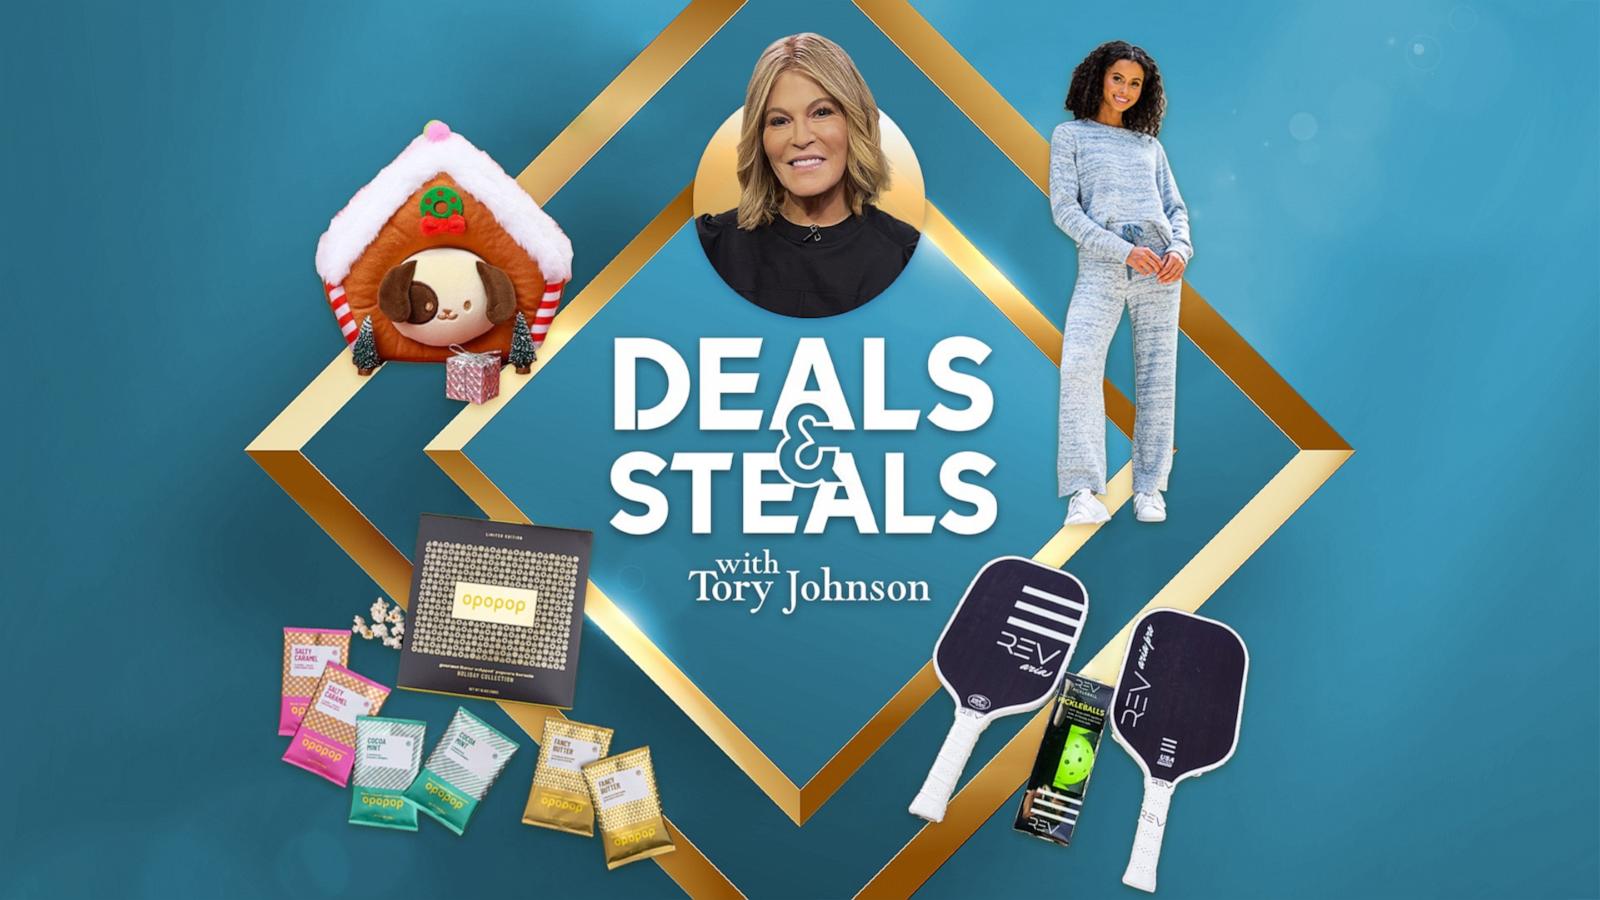 GMA' Deals & Steals on gifts for everyone on your list - Good